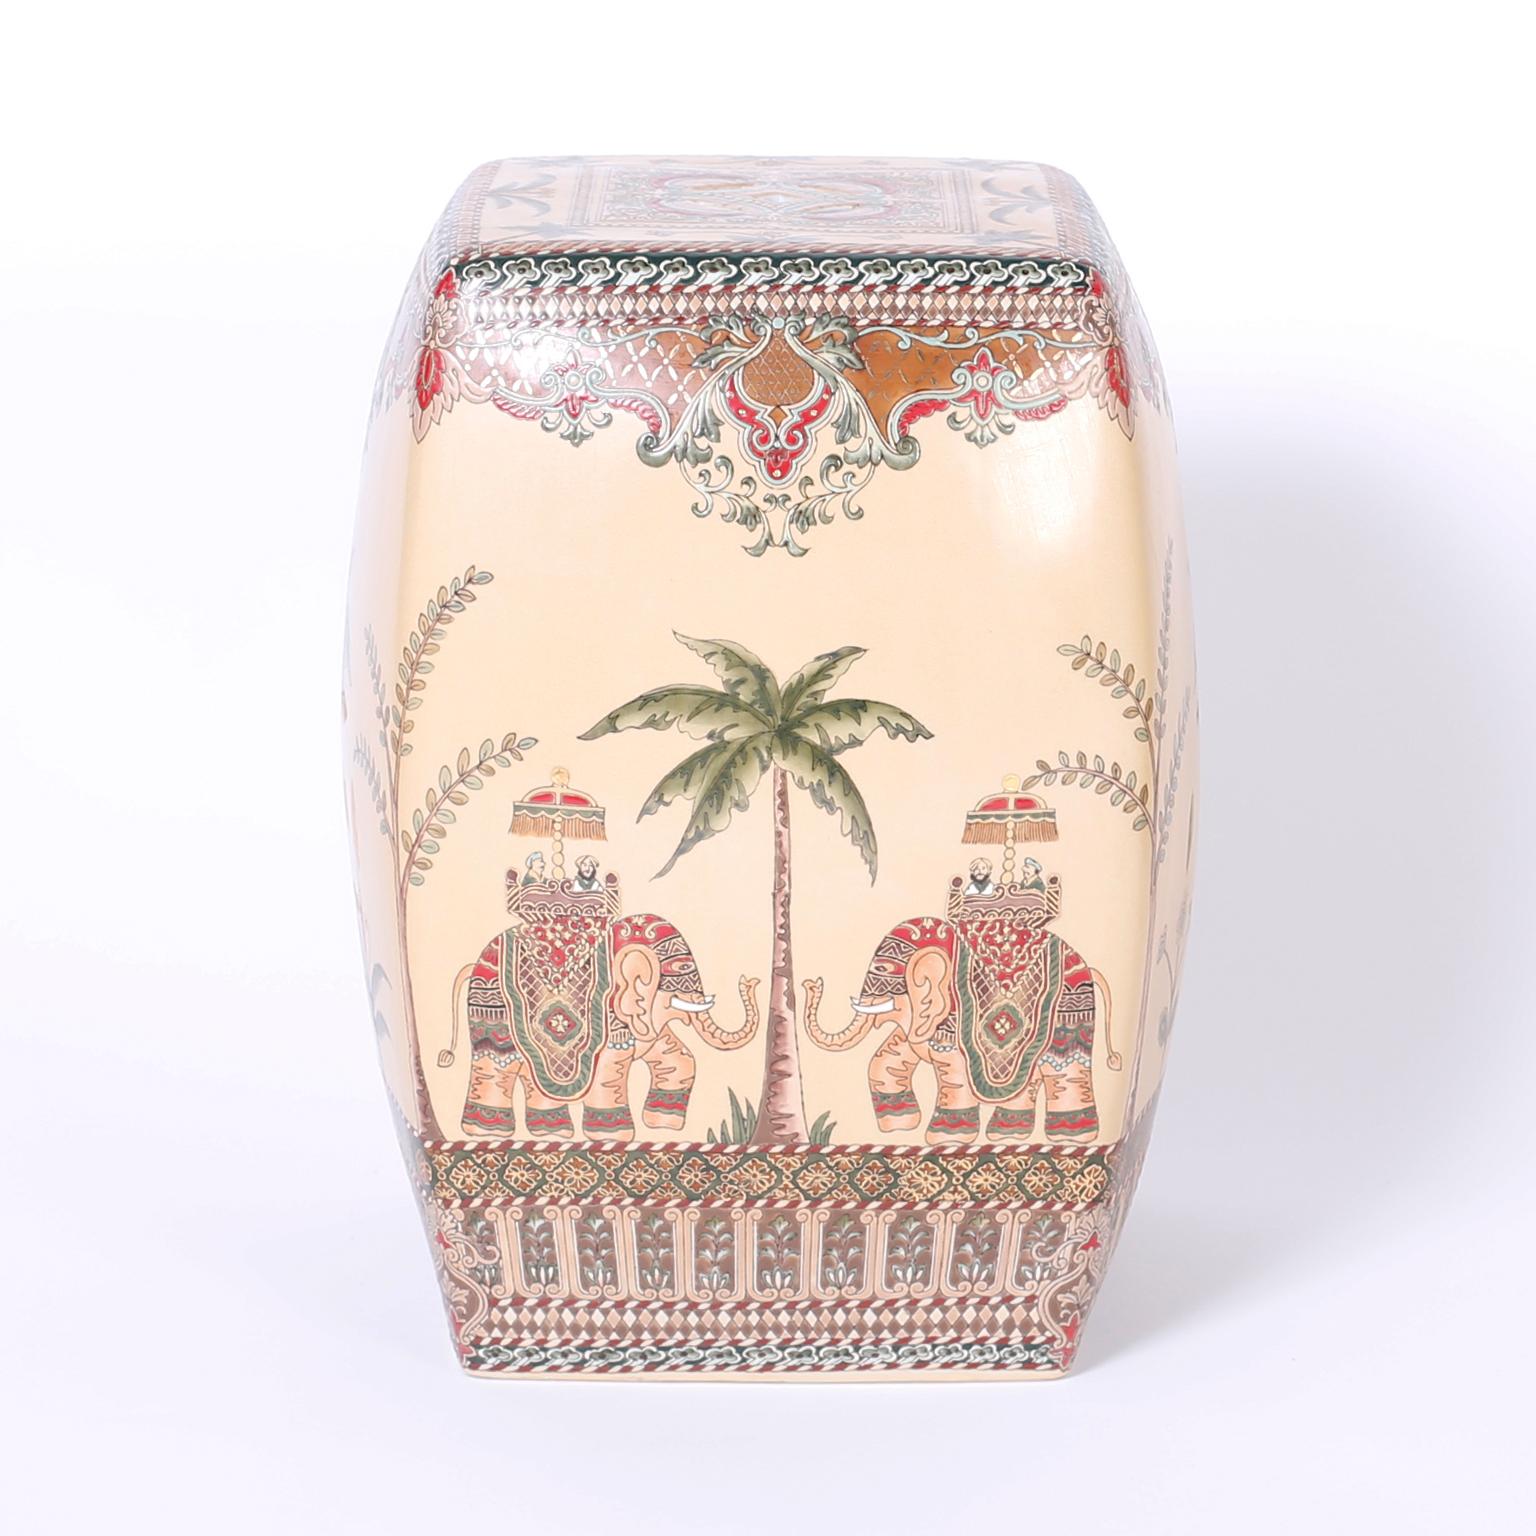 An exotic trio of Chinese terracotta garden seats hand decorated with elaborate floral designs over and under fanciful elephant and palm tree motifs. Priced individually.